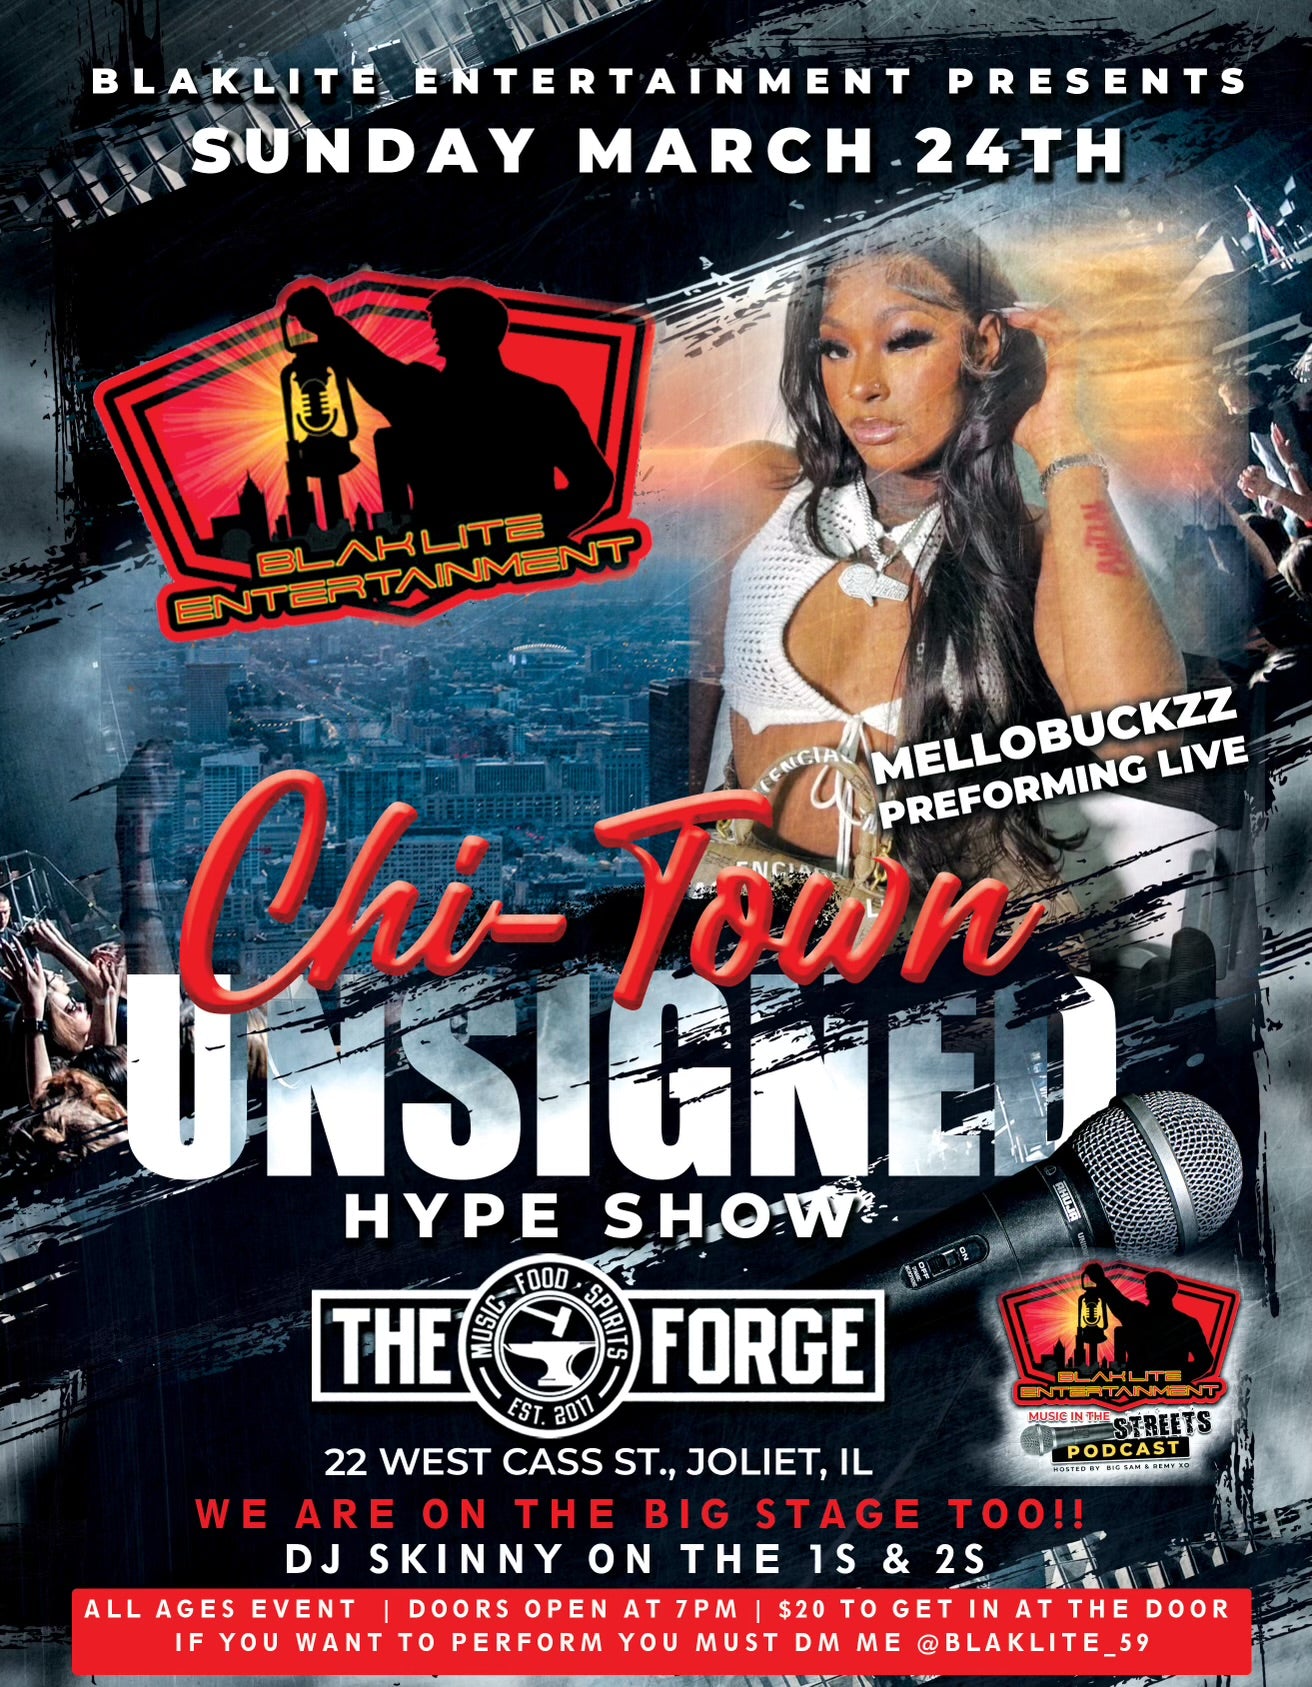 CHI-TOWN UNSIGNED HYPE SHOW